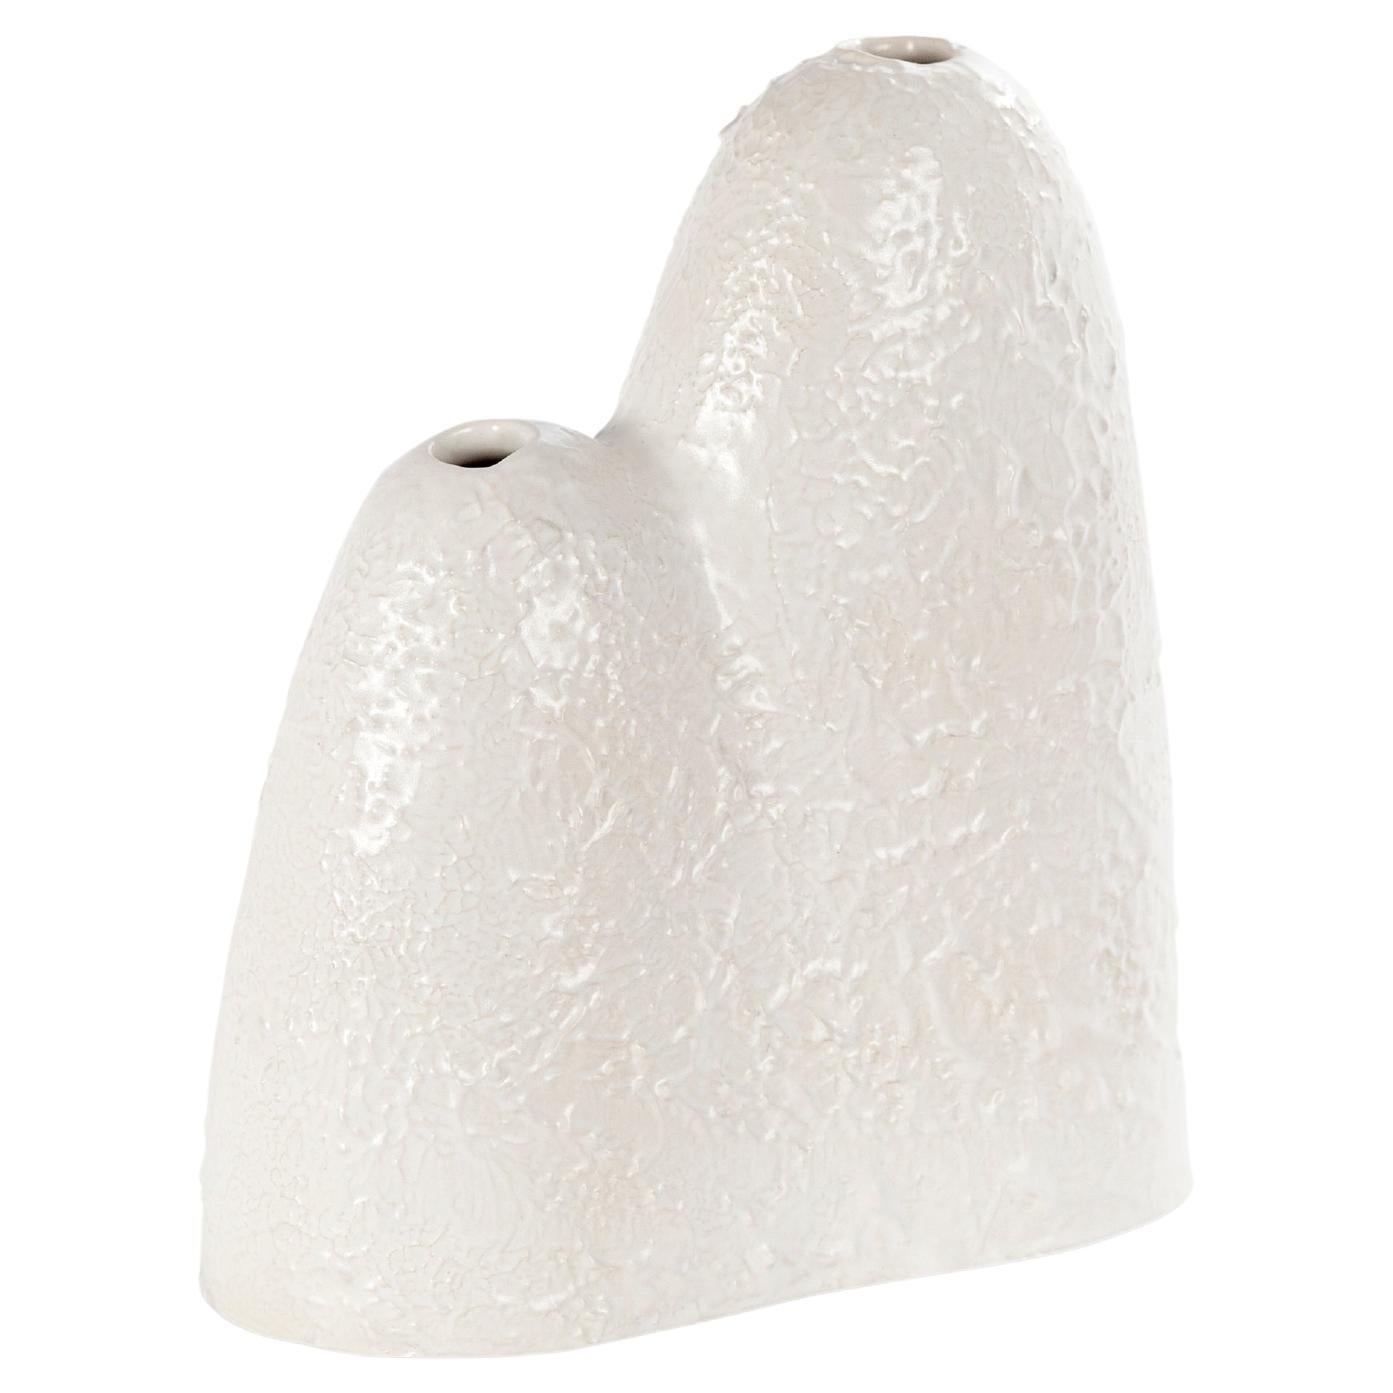 Mountain Small White Vase by Pulpo For Sale